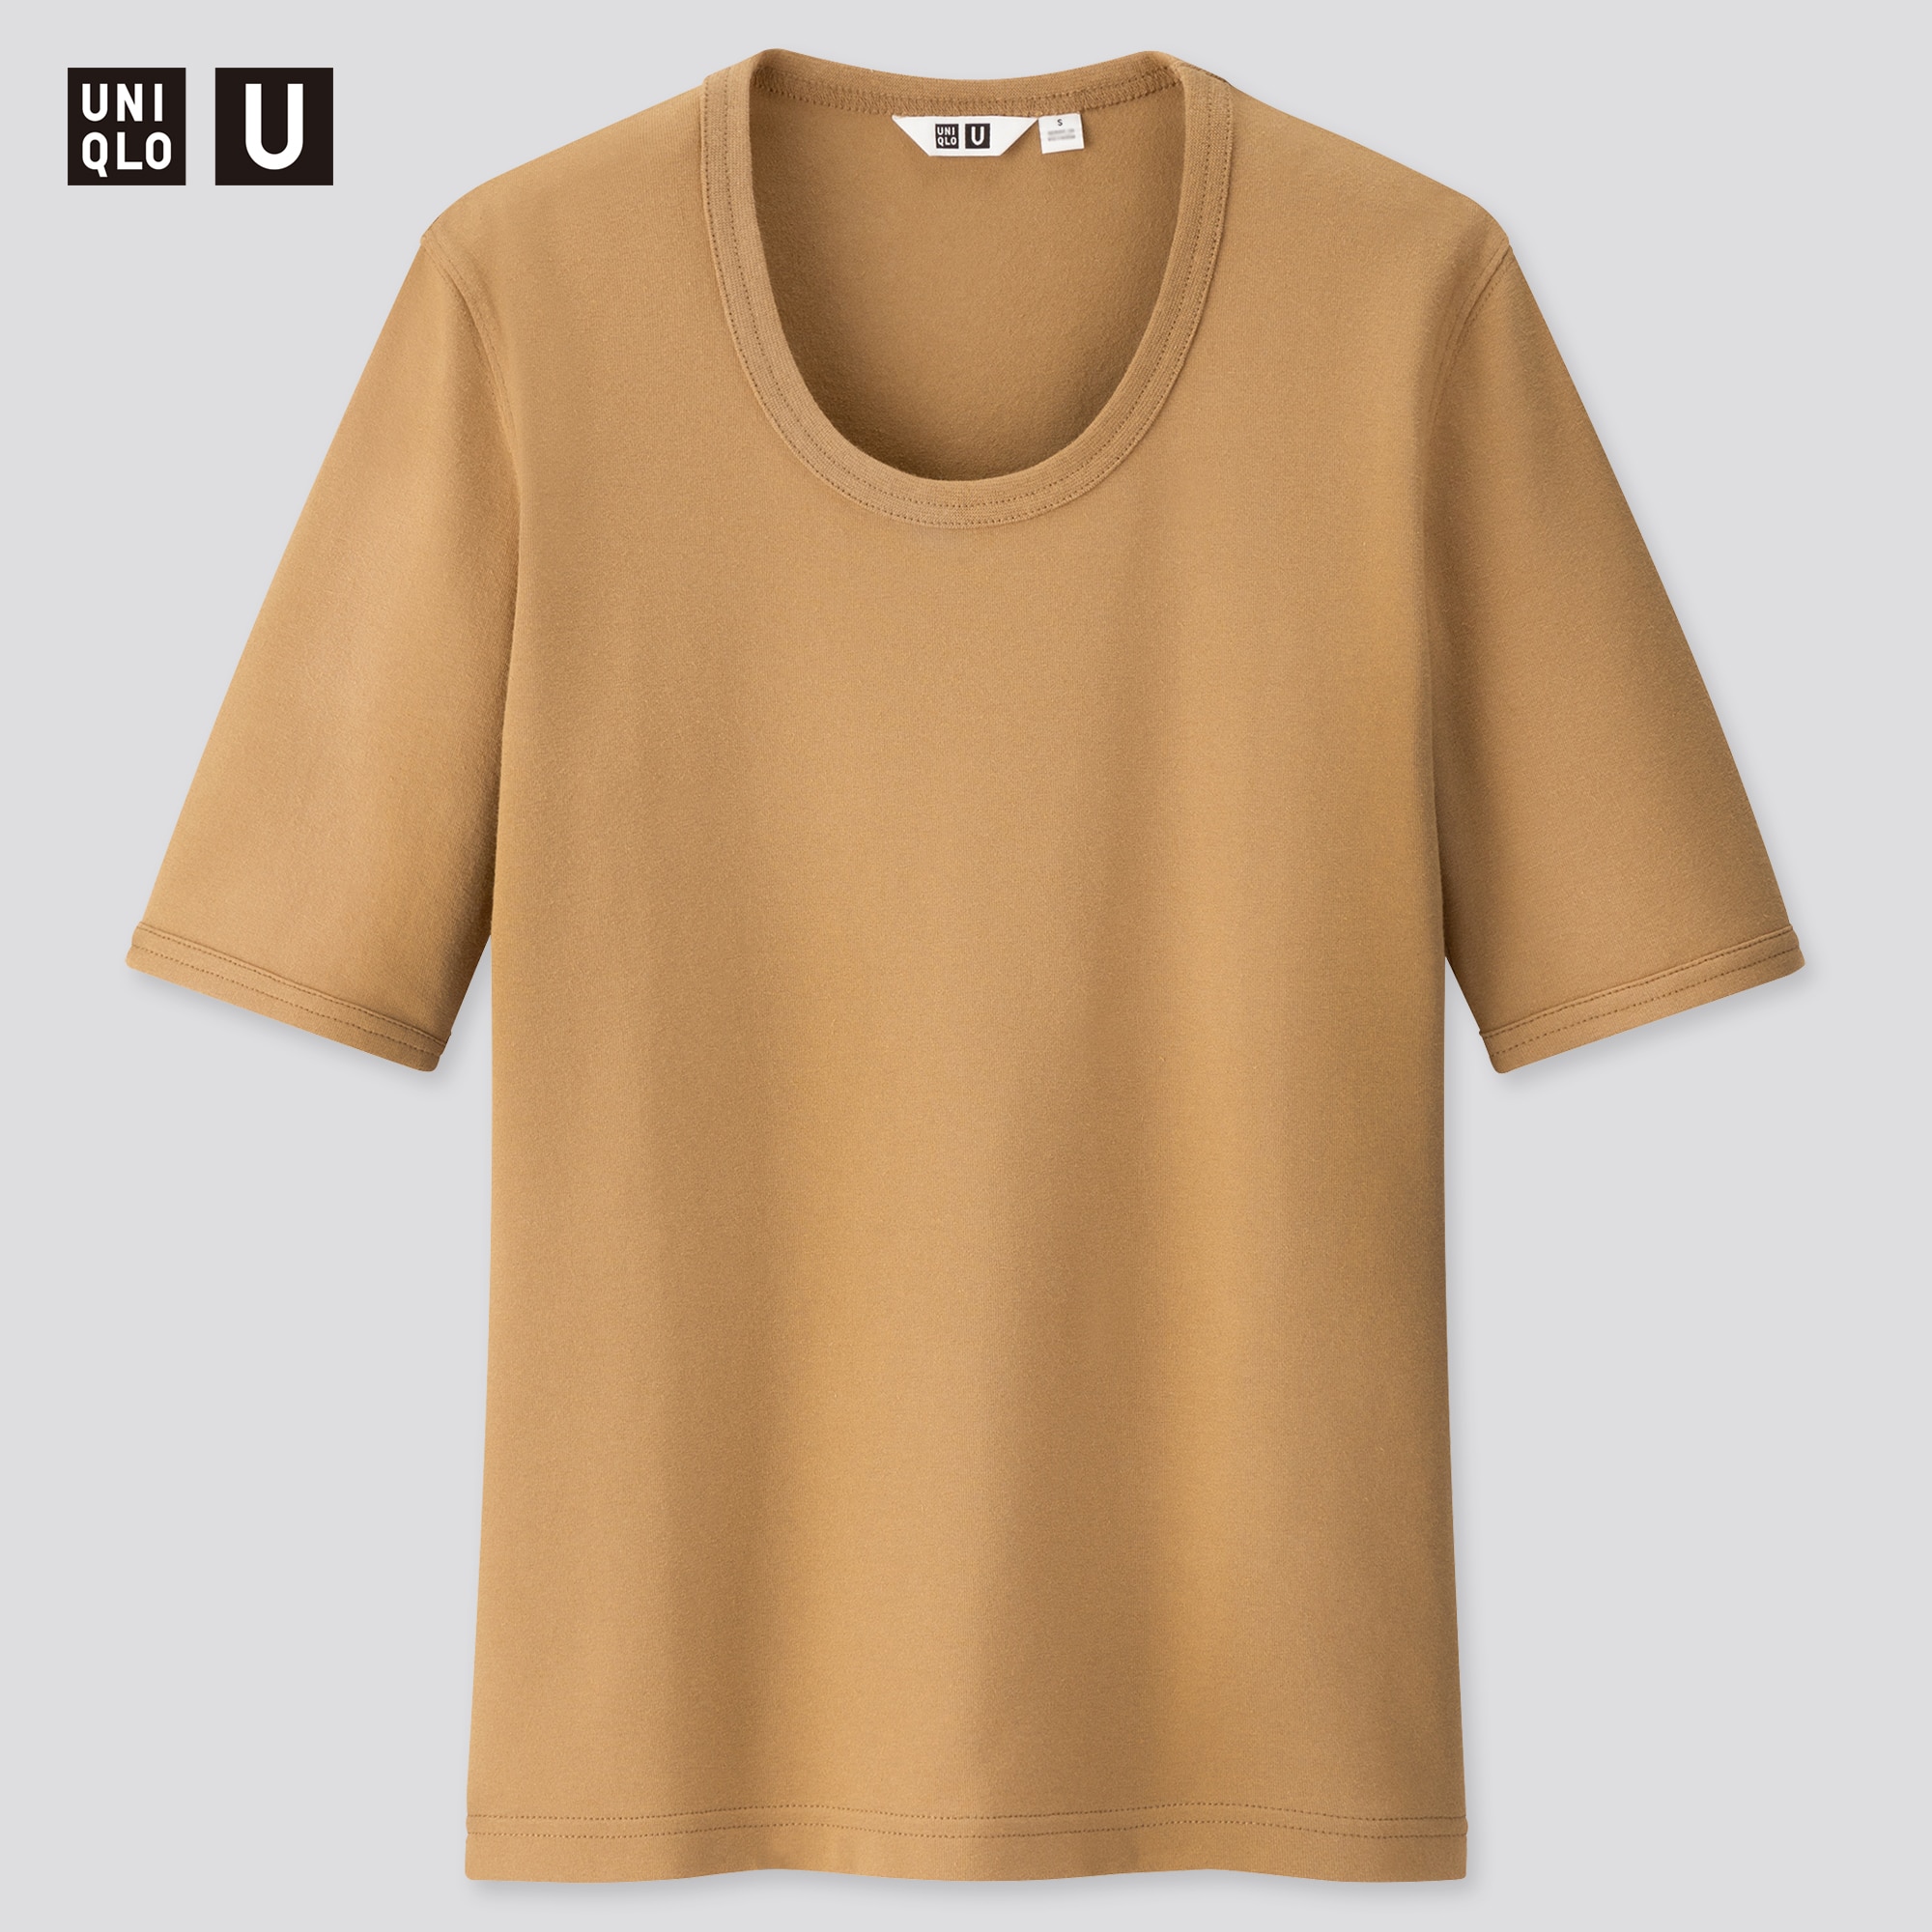 Women Uniqlo U Fitted Short Sleeved T-Shirt